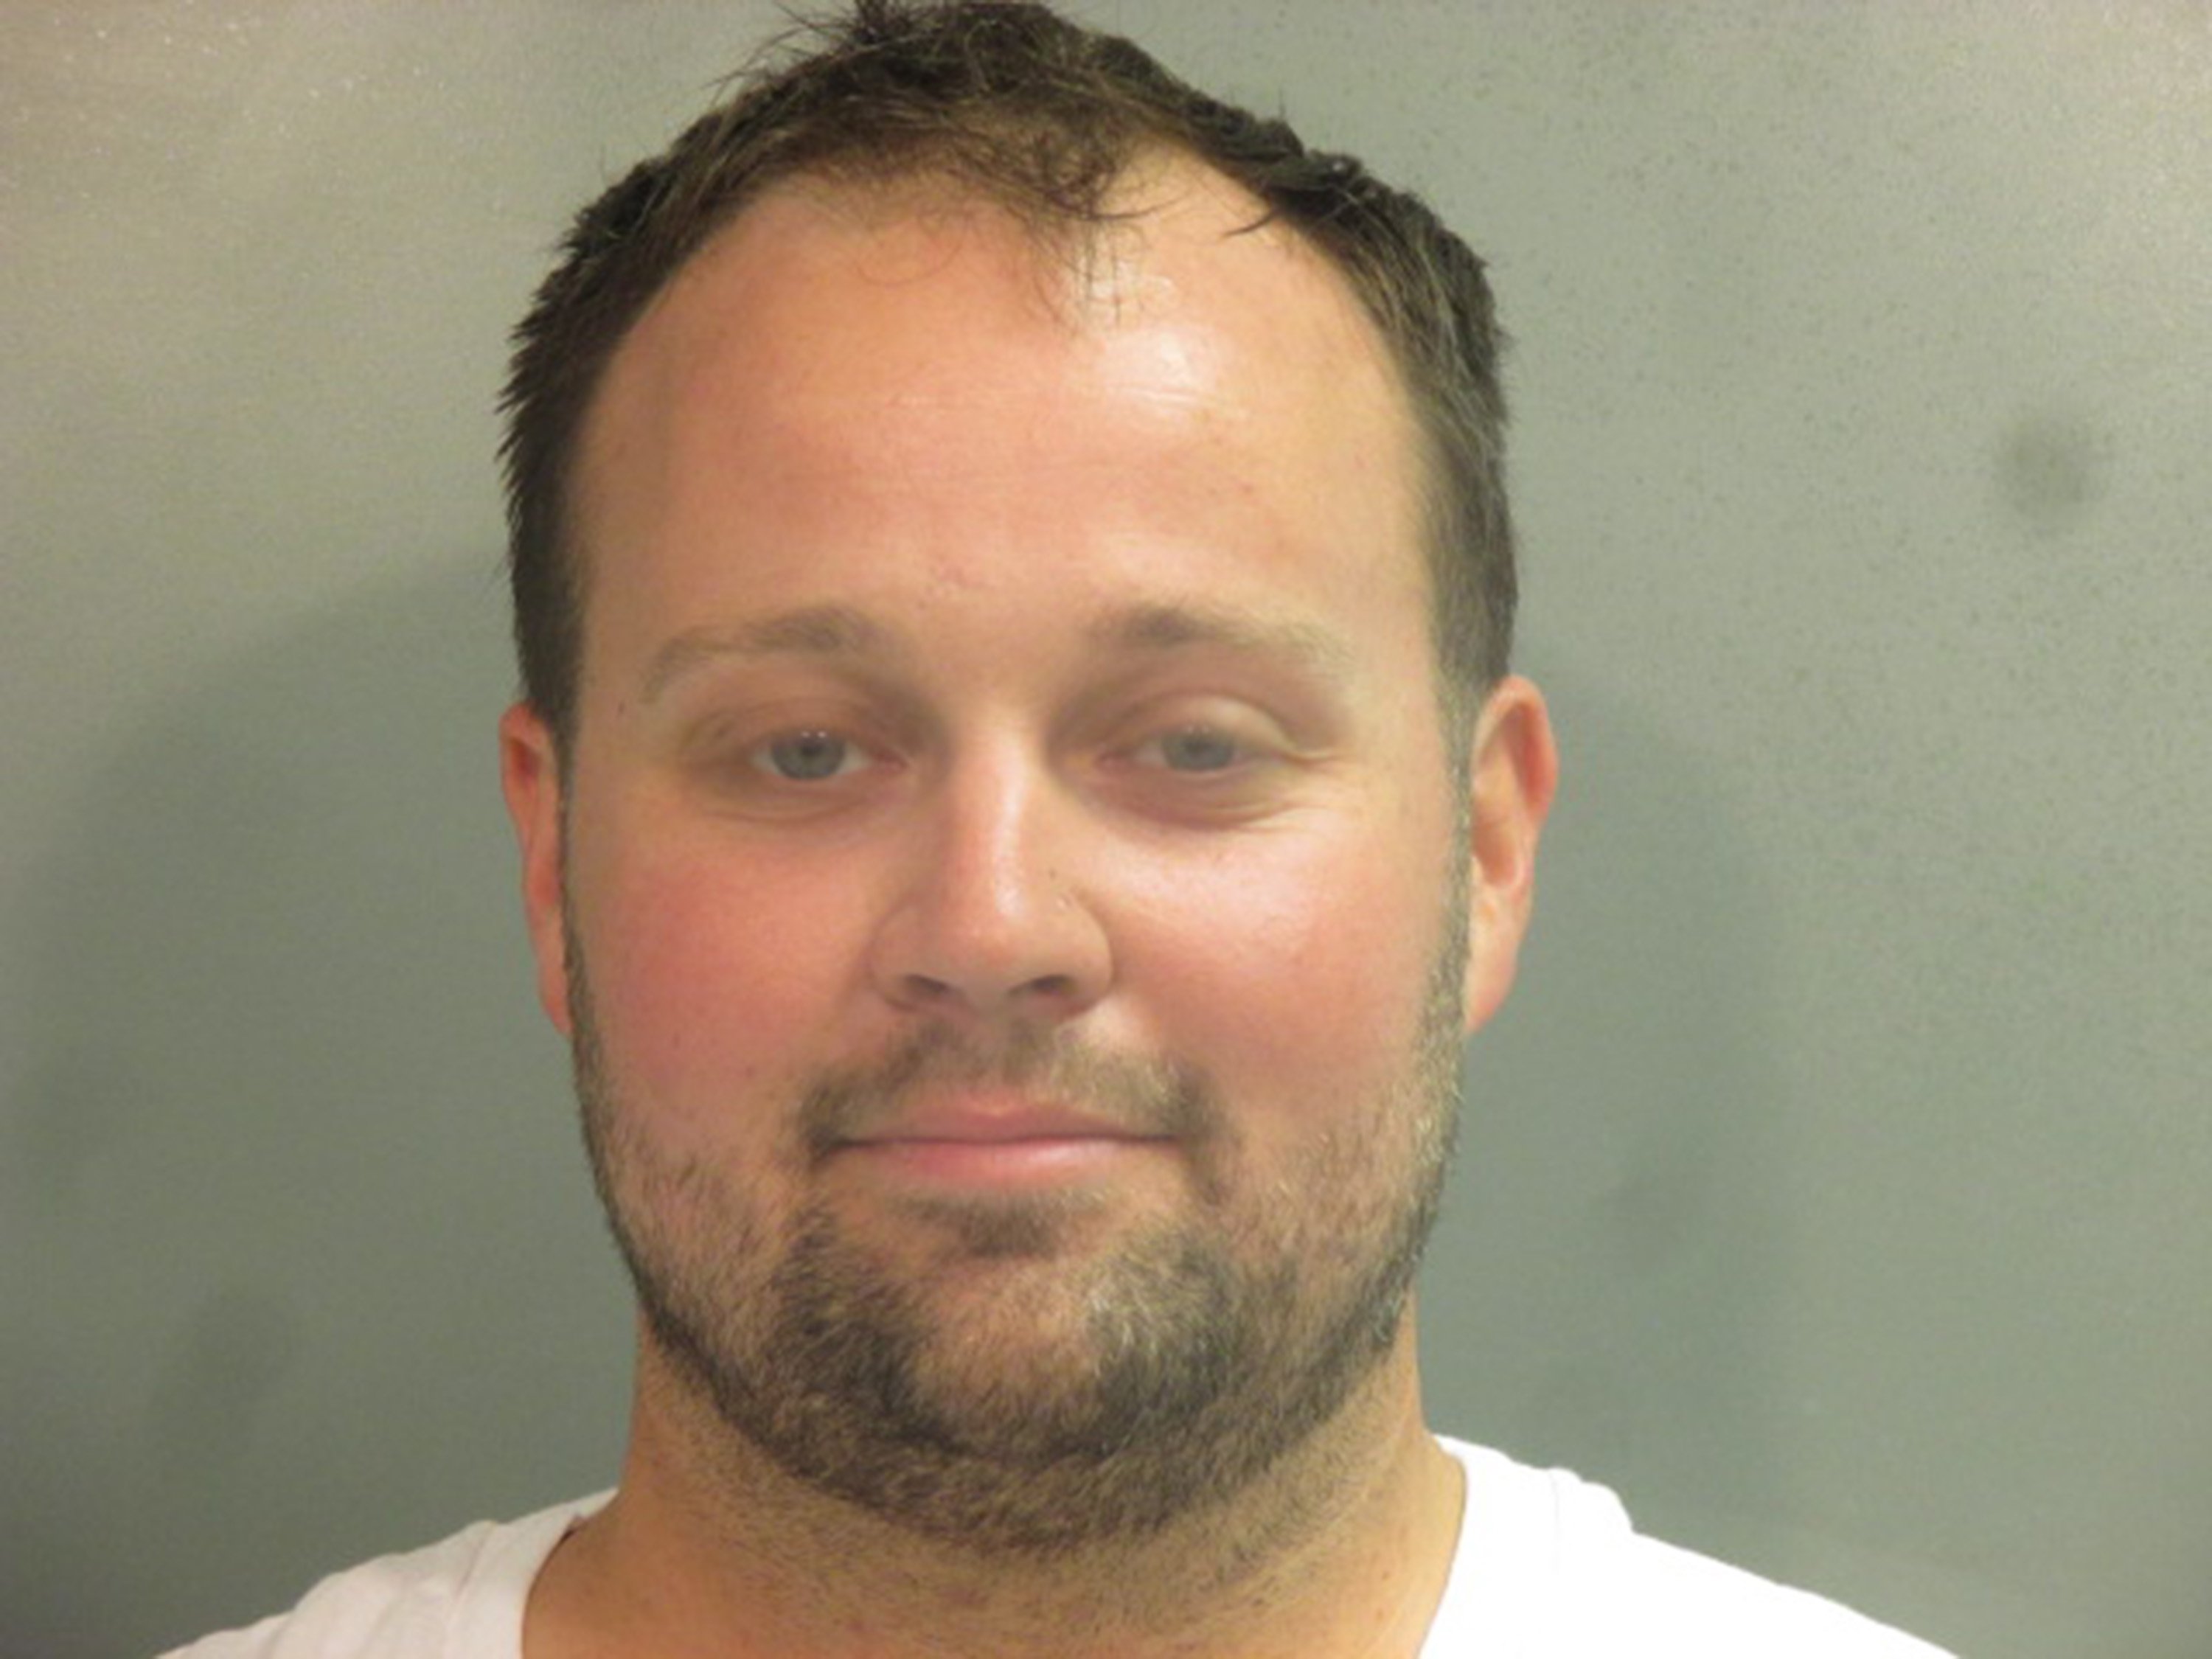 Josh Duggar's April 2021 mugshot taken by the Washington County Sheriff's office. Josh Duggar's trial conclude in December 2021 with a guilty verdict